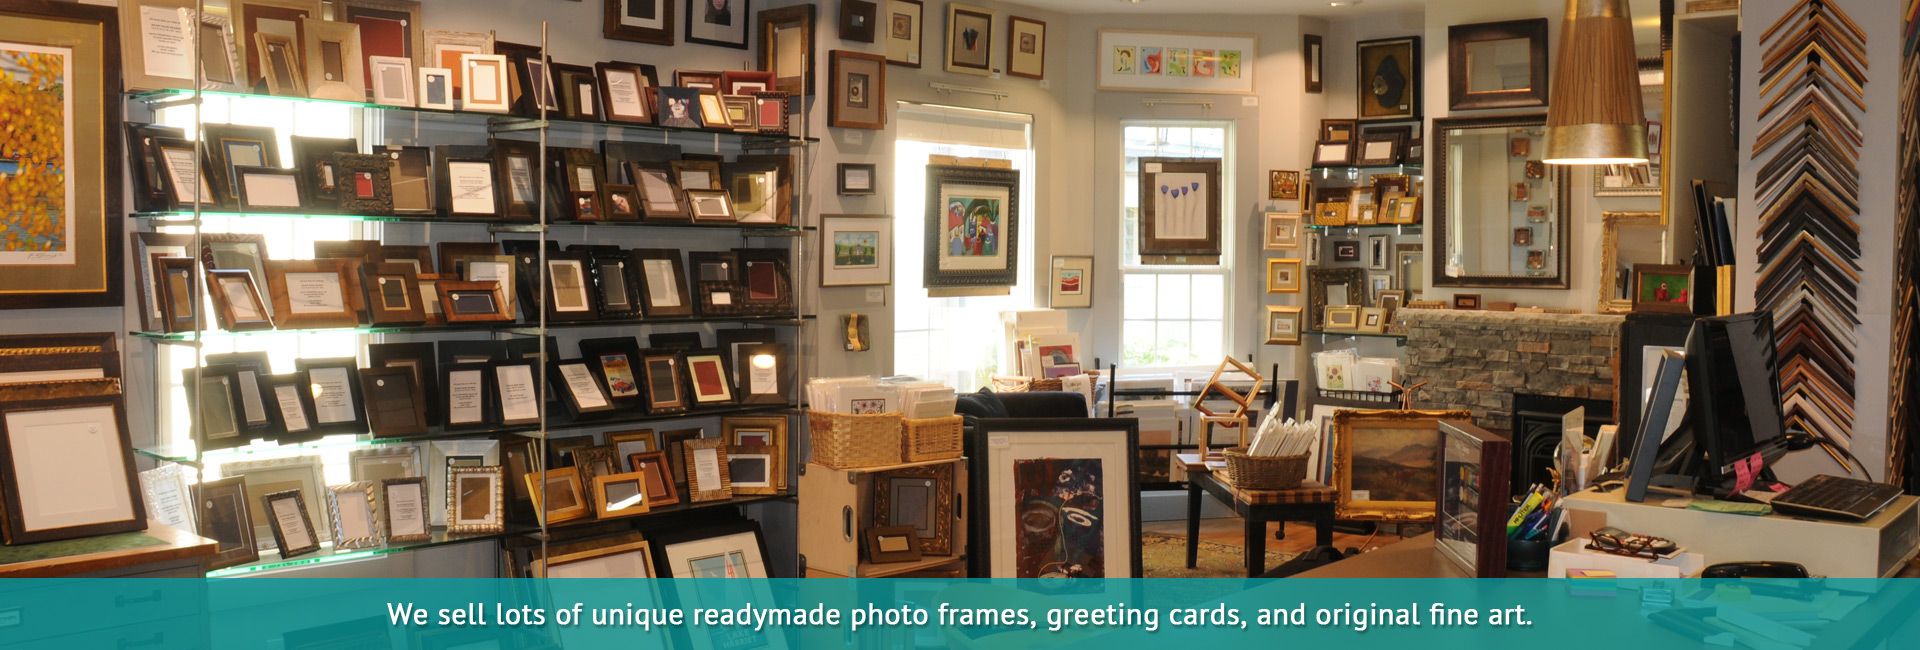 Photo frames & readymades - perfect last minute gifts